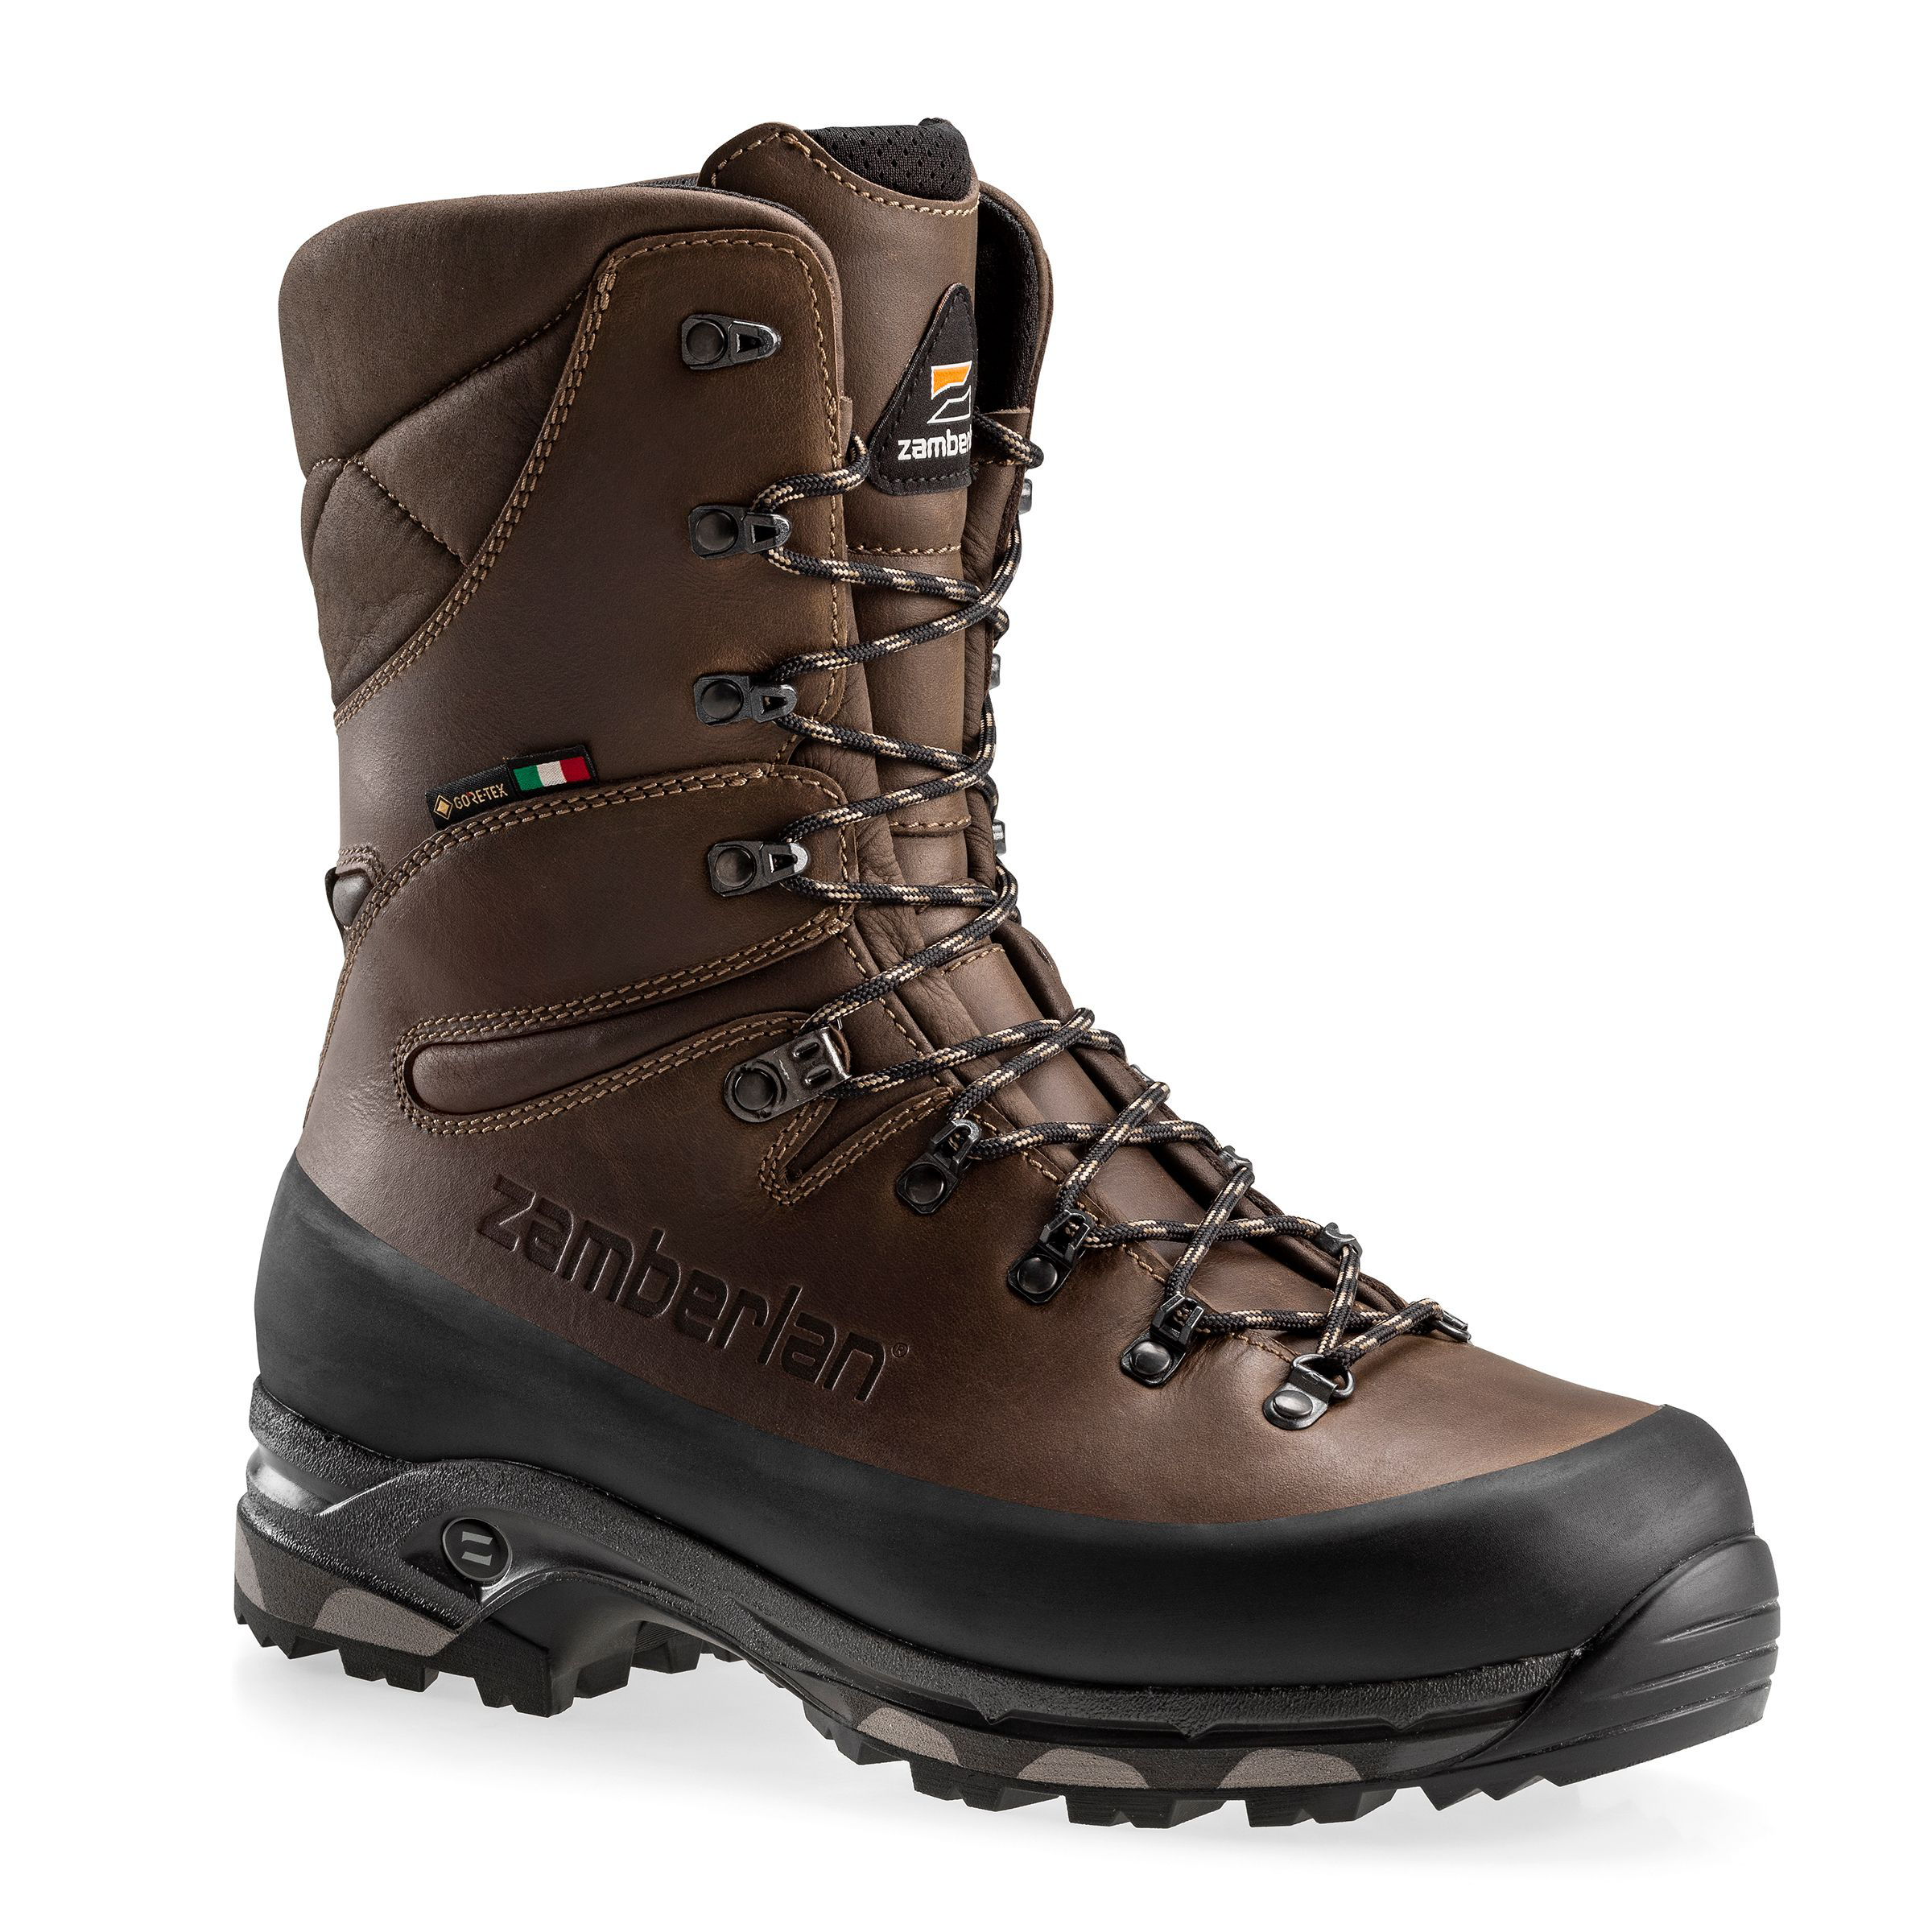 Zamberlan 1005 Hunter Pro GTX RR WL GORE-TEX Insulated Hunting Boots for Men - Brown - 11.5W